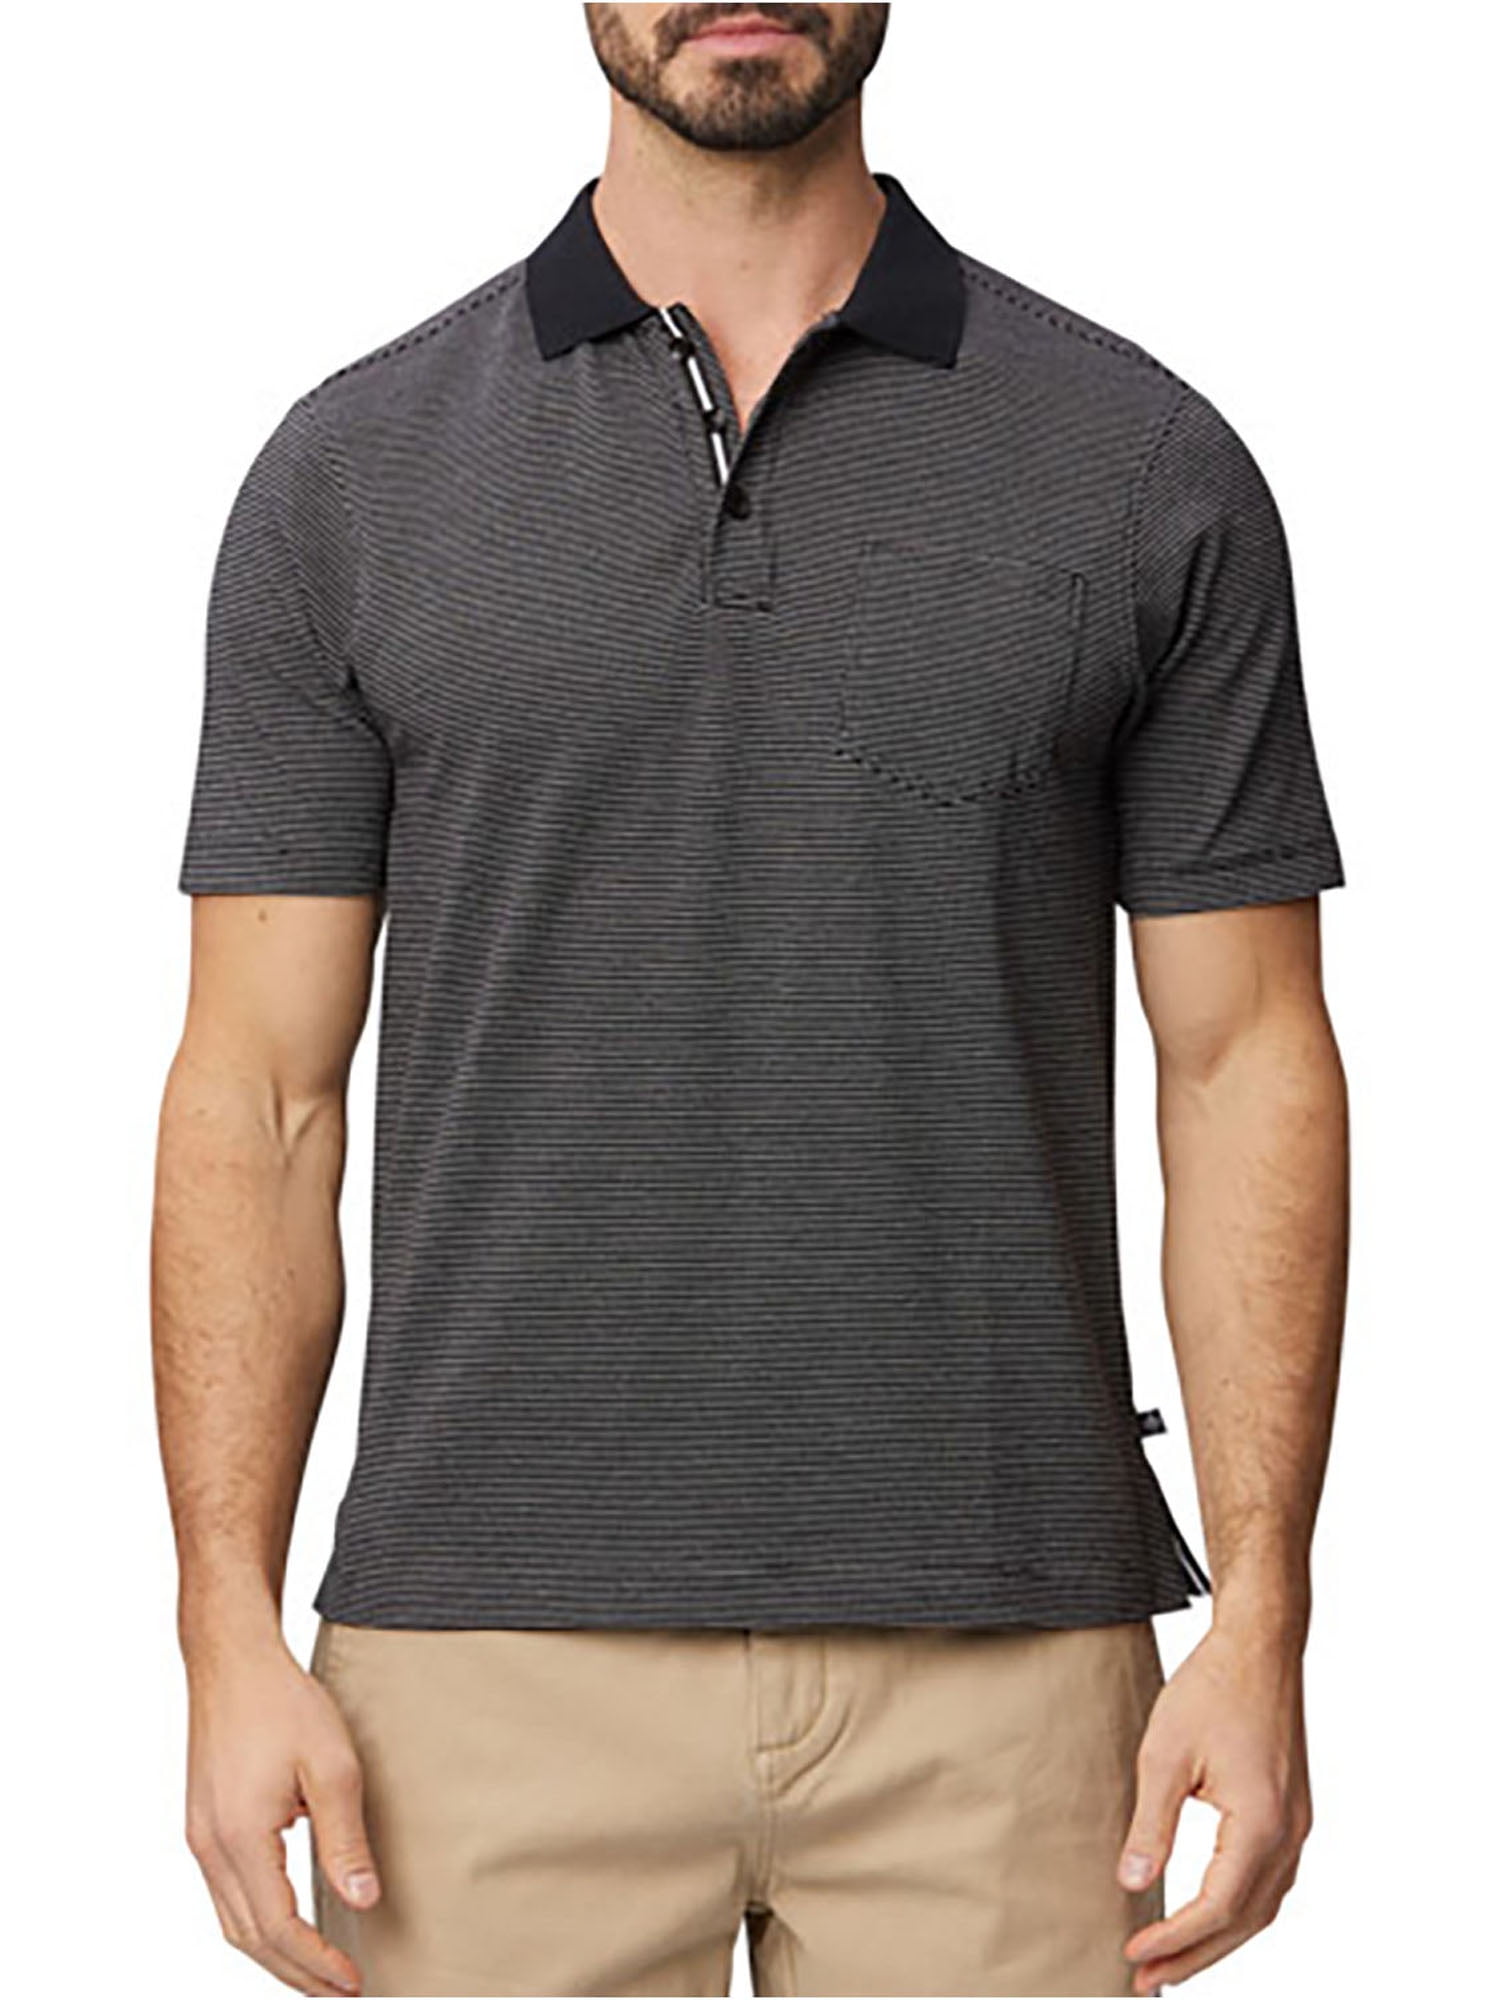 Champion Adult Men NCAA Textured Solid Polo